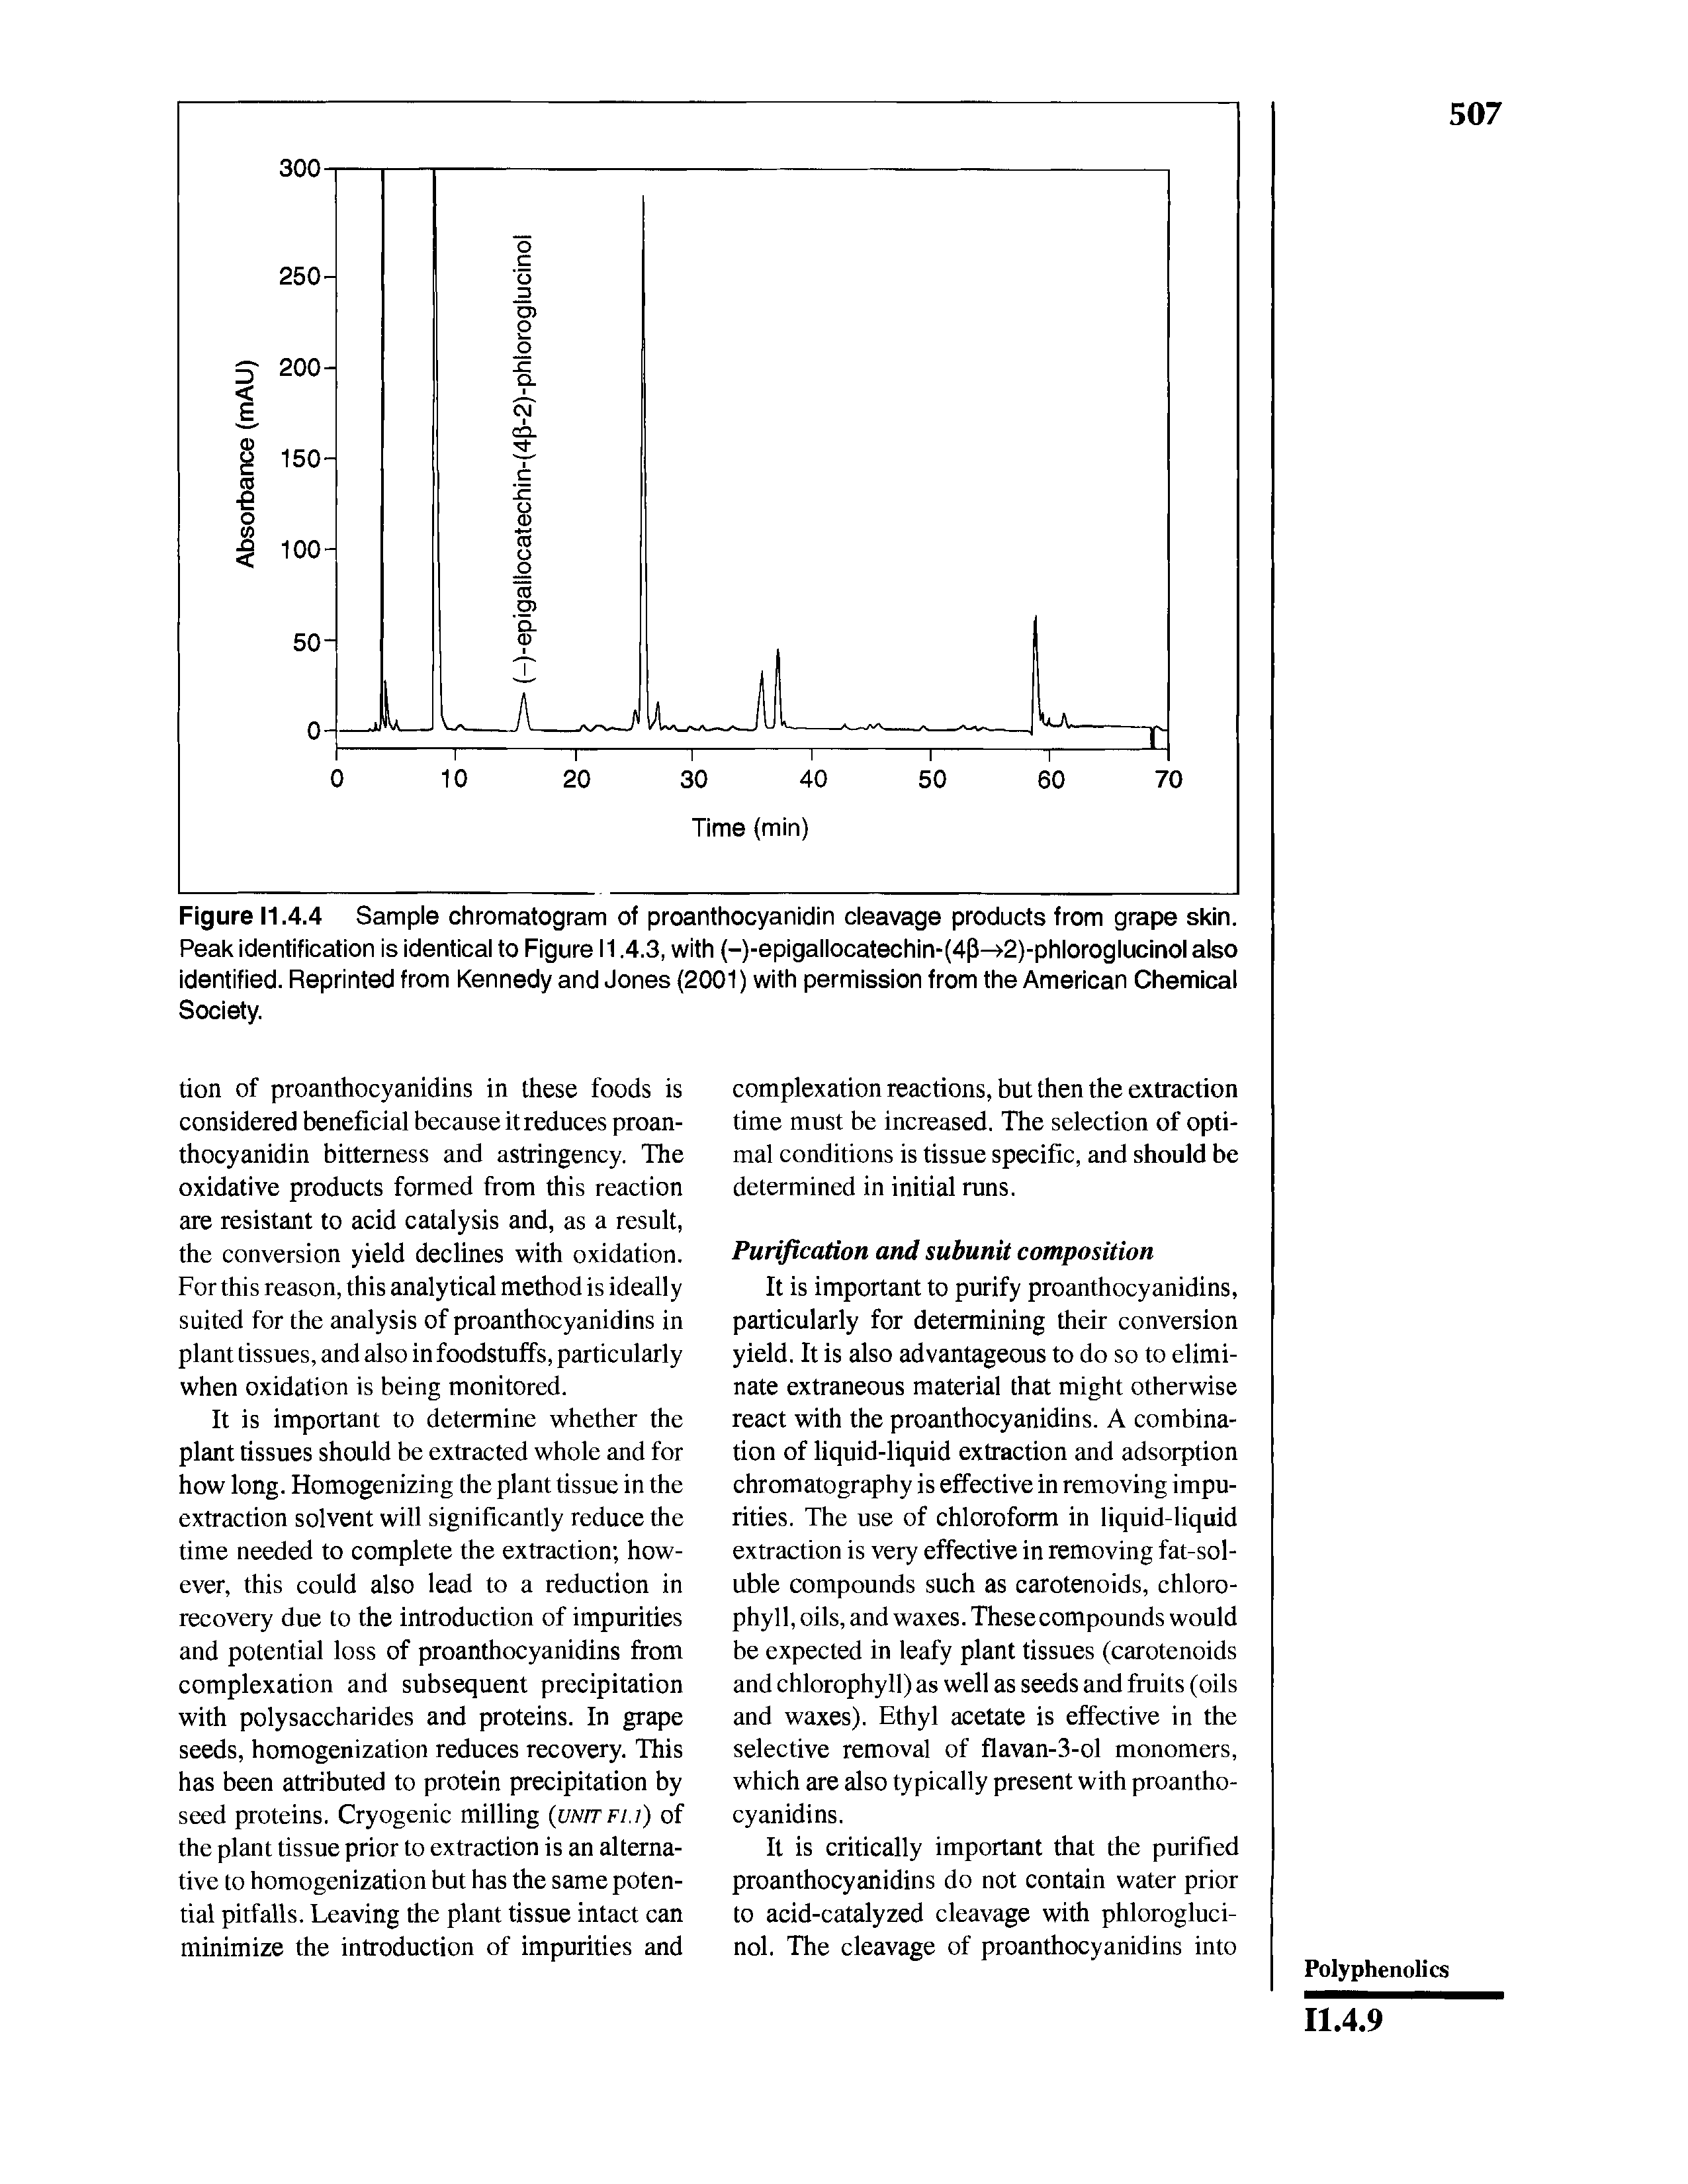 Figure 11.4.4 Sample chromatogram of proanthocyanidin cleavage products from grape skin. Peak identification is identical to Figure 11.4.3, with (-)-epigallocatechin-(4P->2)-phloroglucinol also identified. Reprinted from Kennedy and Jones (2001) with permission from the American Chemical Society.